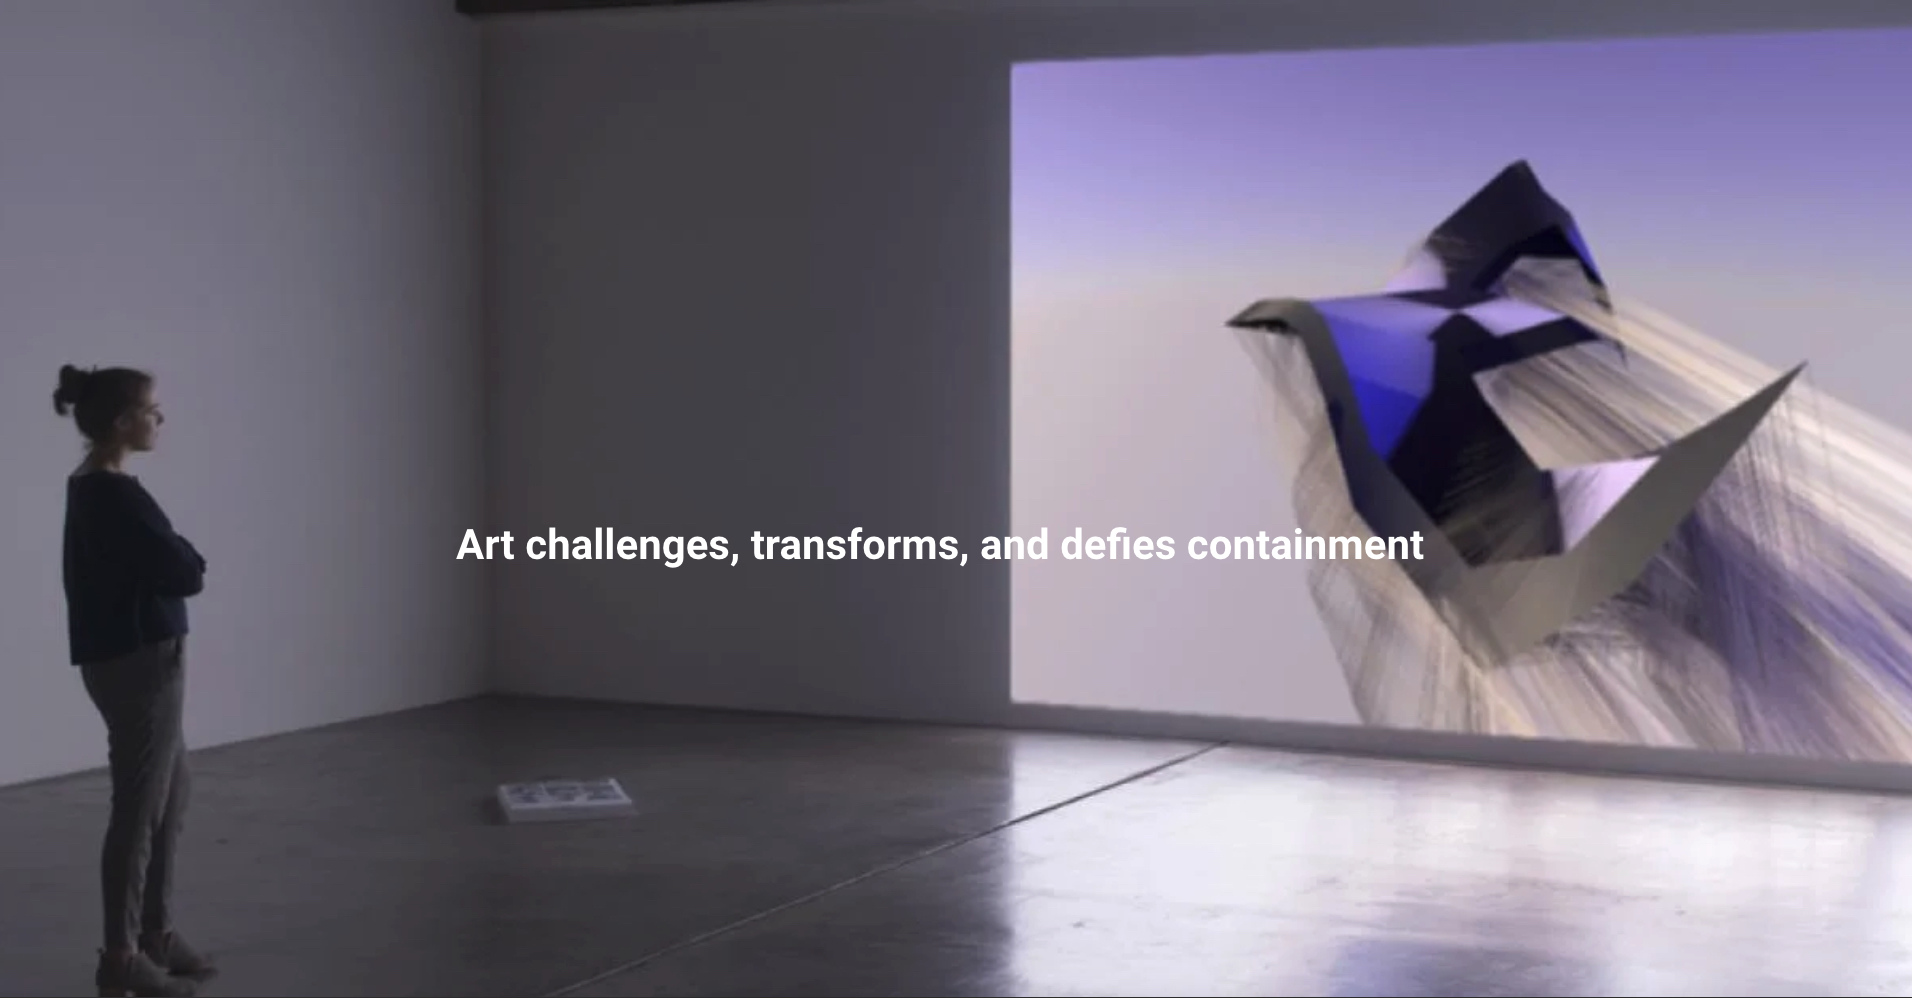 Art challenges, transforms, and defies containment. We need all the tools we can get for that.